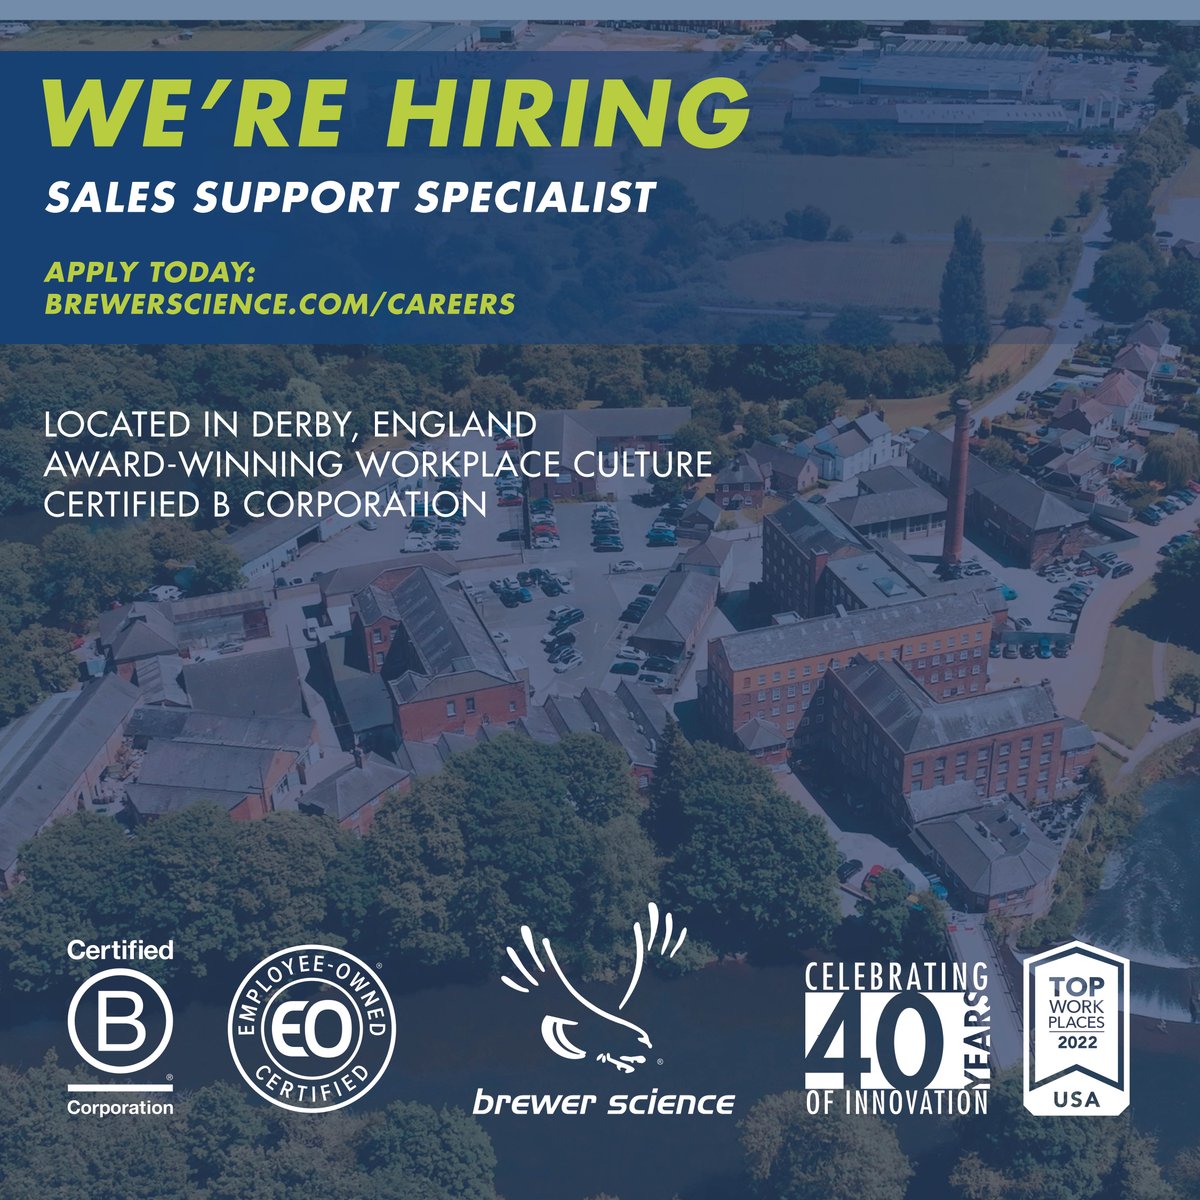 test Twitter Media - We are looking for a Sales Support Specialist to join our Global Sales and Customer Operations team in Darley Abbey, Derbyshire, England! 
Learn more about the Sales Support Specialist position on our website: https://t.co/tBf4YVPR91 https://t.co/zznpfl6W9c